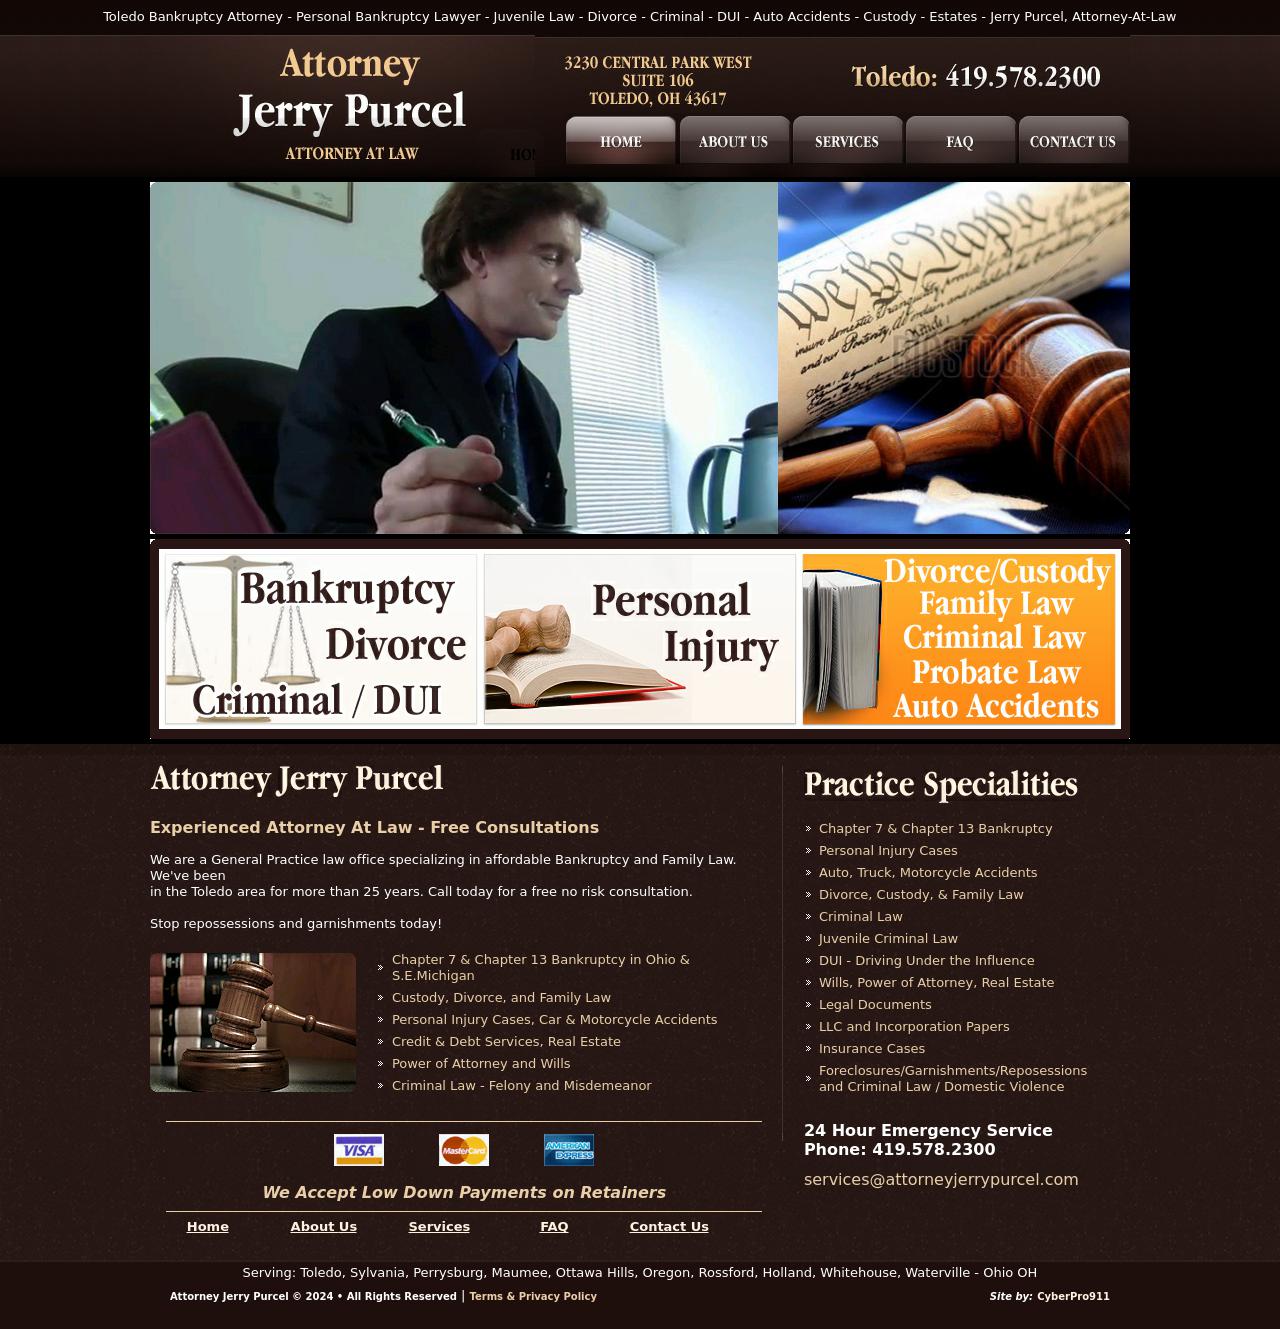 Purcel, Jerry - Toledo OH Lawyers